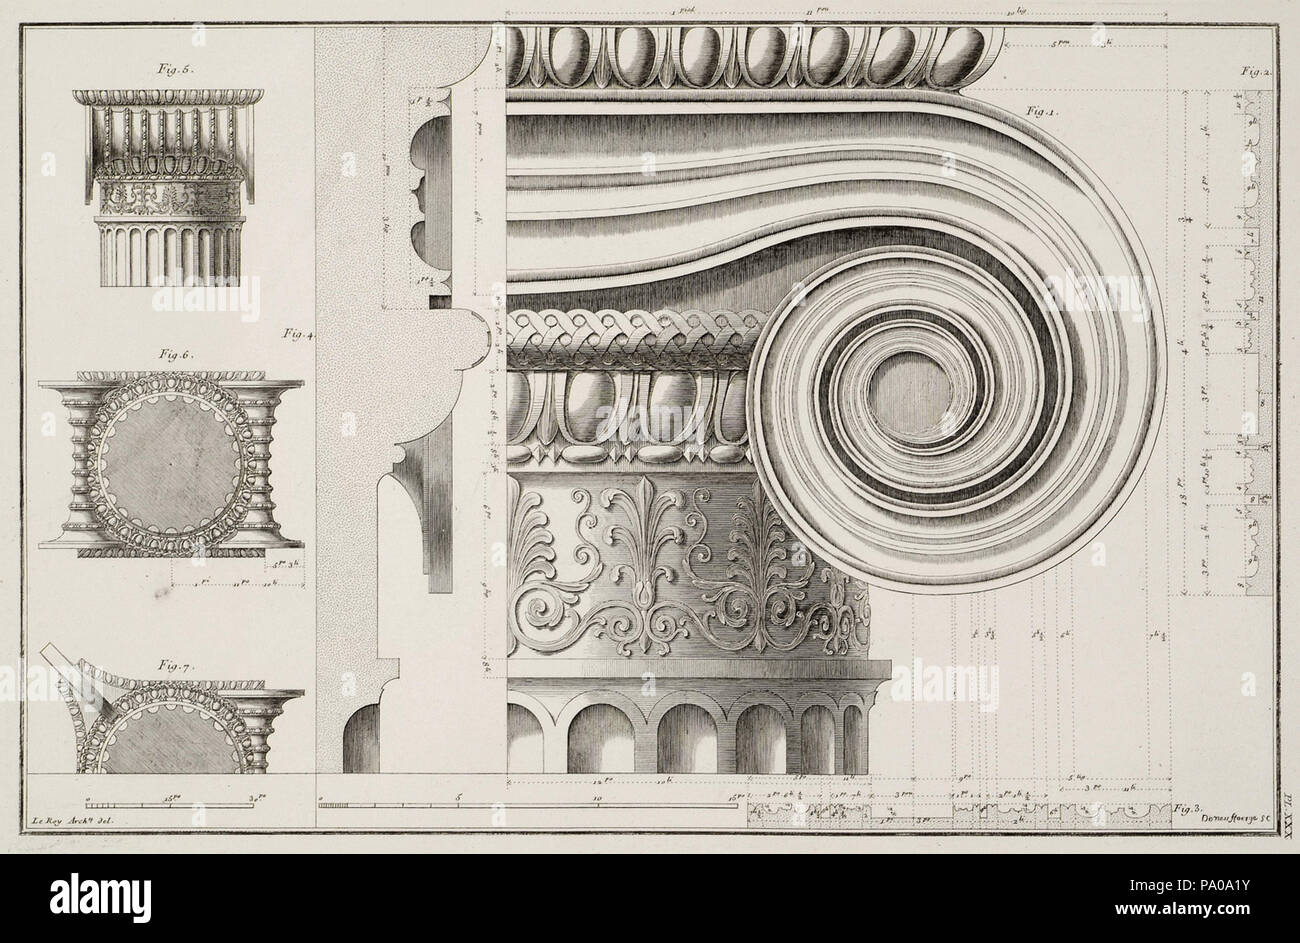 625 Erechtheion- 1 View of Ionic capital 2 and 3 Section plans of the helix of Ionic capital 4 Section plan of the capital 5 - Le Roy Julien David - 1770 Stock Photo